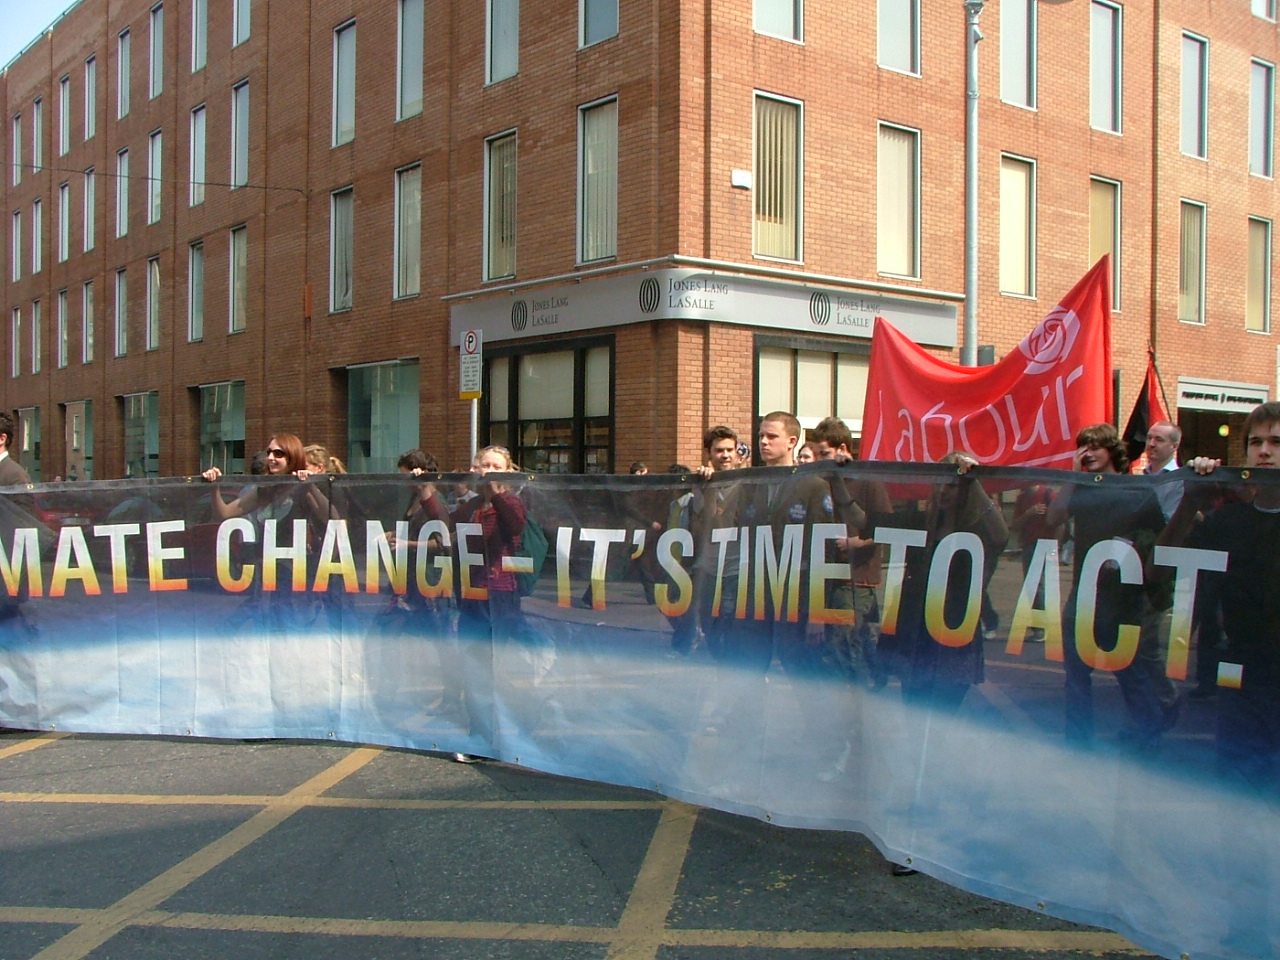 http://www.indymedia.ie/attachments/apr2007/climate_change_time_to_act.jpg